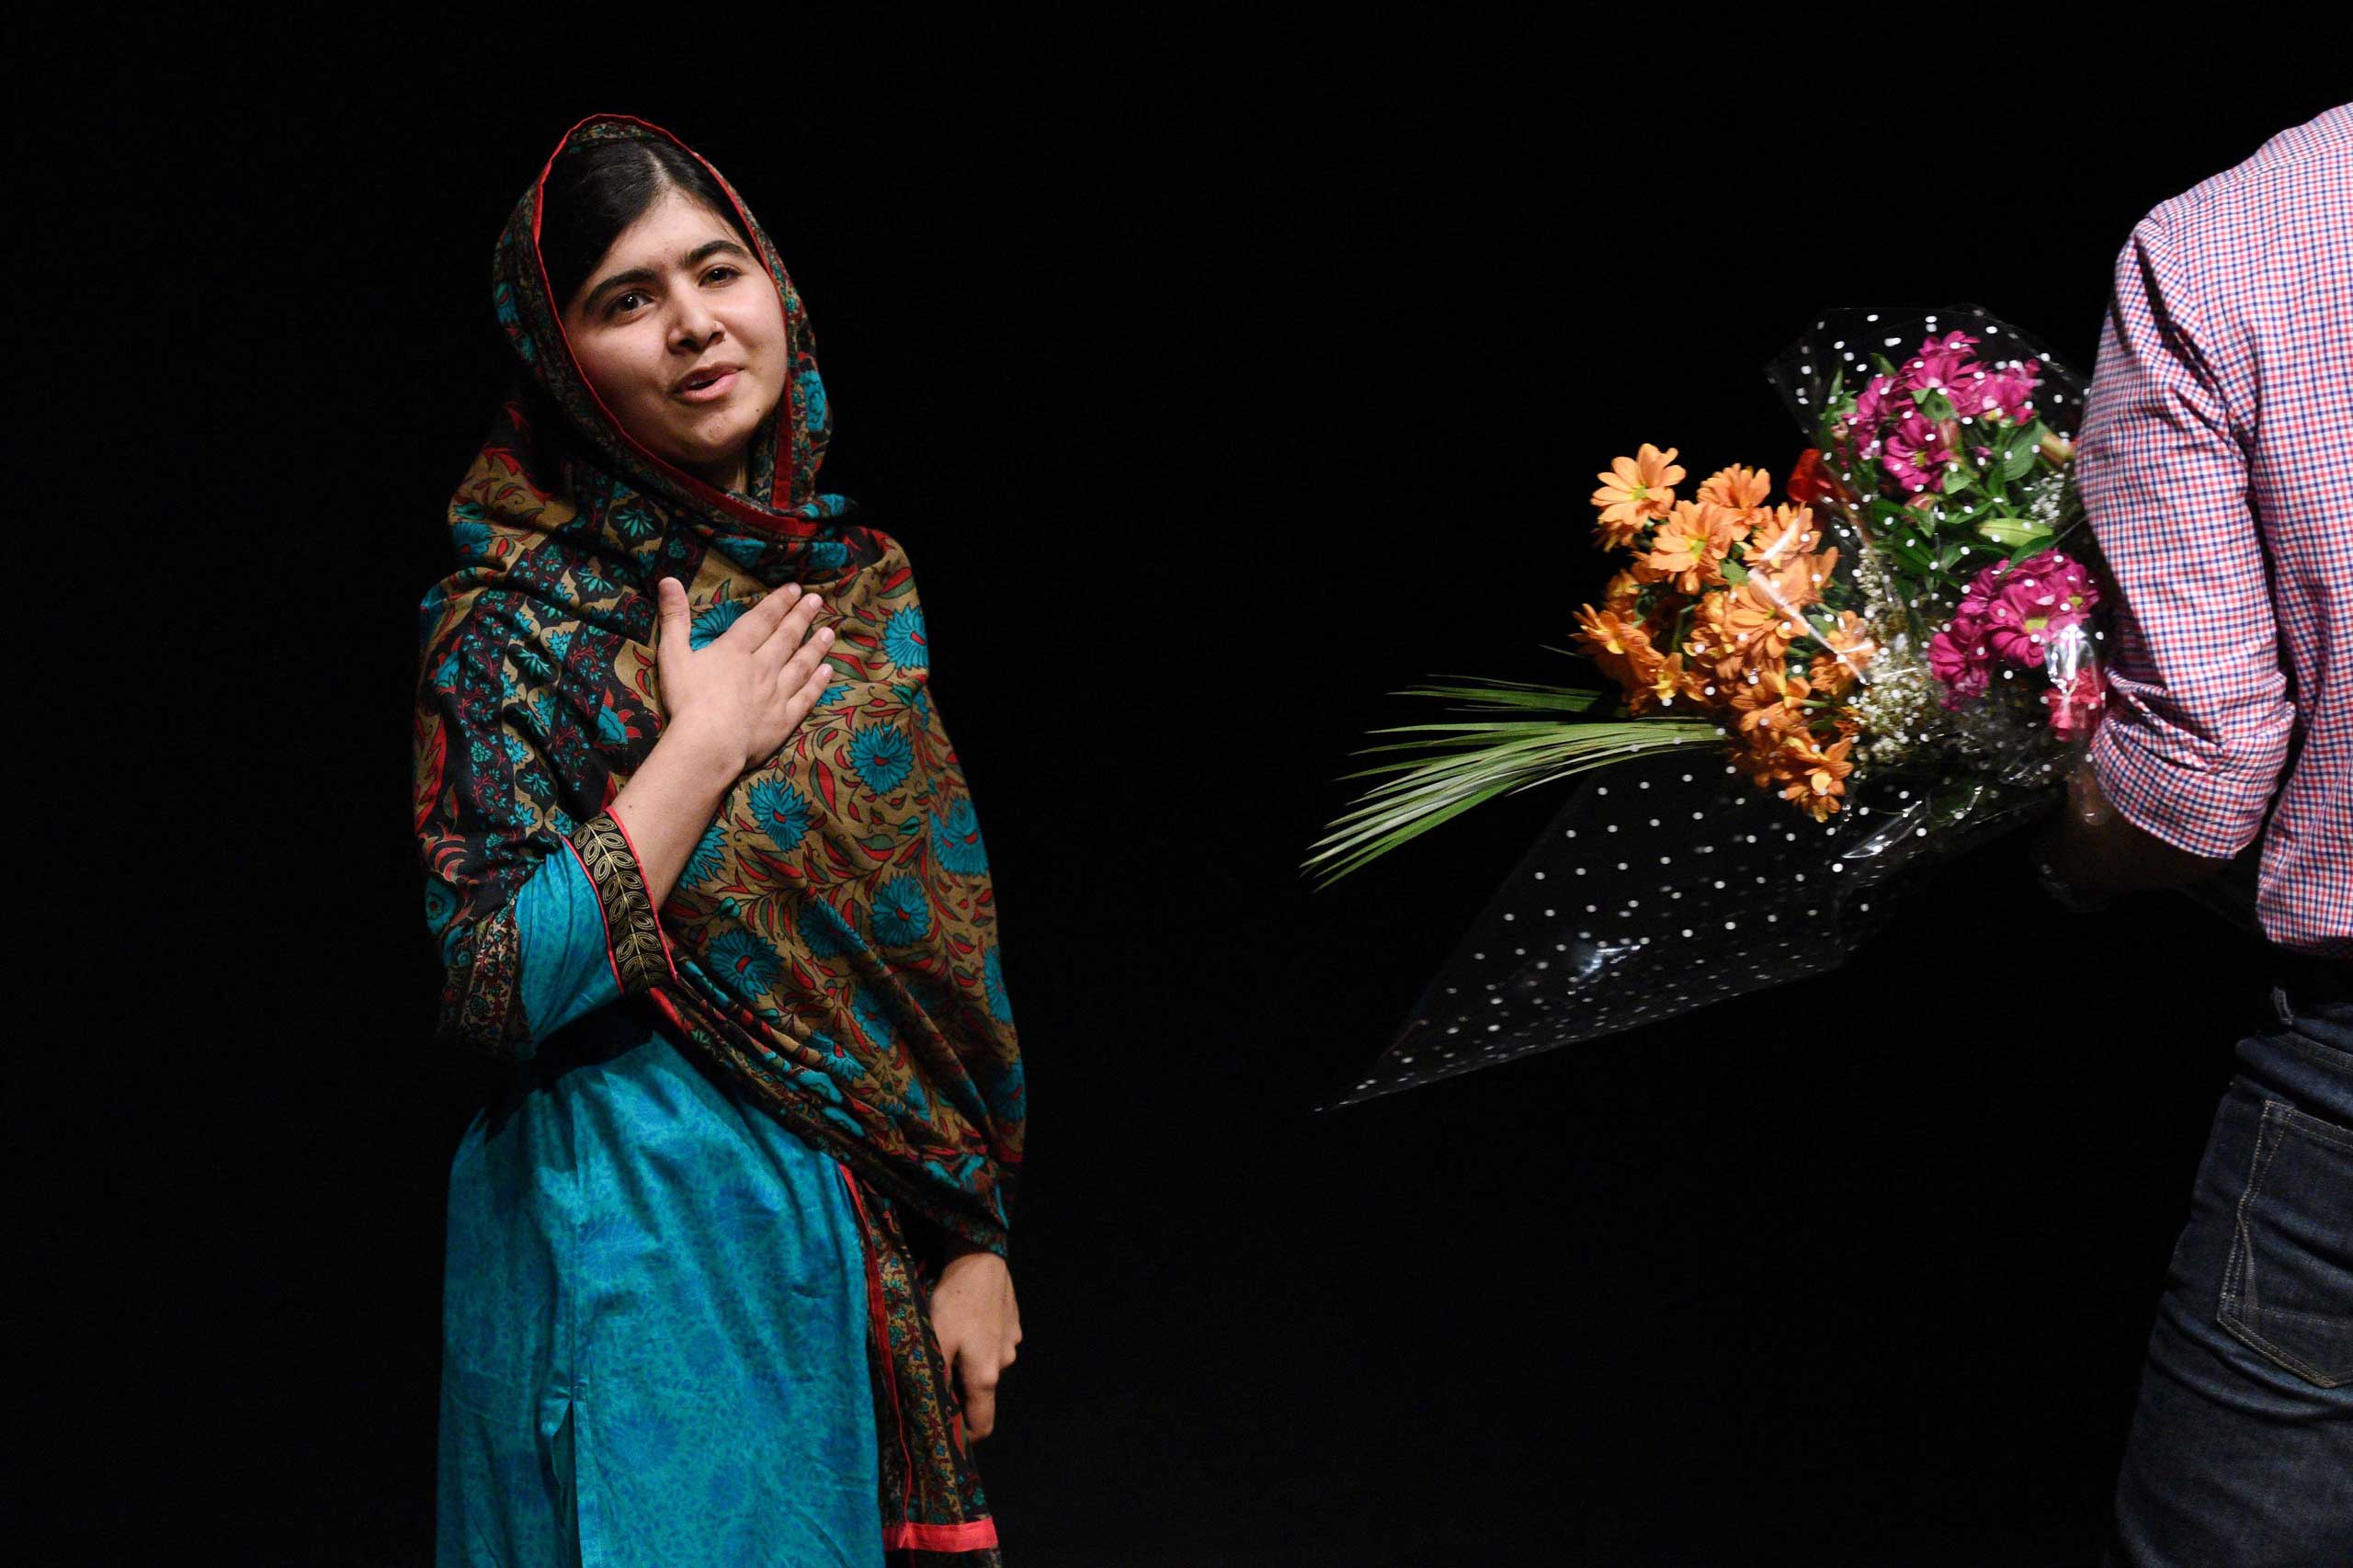 Malala Yousafzai, Pakistani girls’-rights and
                              education activist, accepts flowers in Birmingham,
                              England, after being named a Nobel Peace Prize
                              winner (with India’s Kailash Satyarthi) on Oct. 10, 2014.